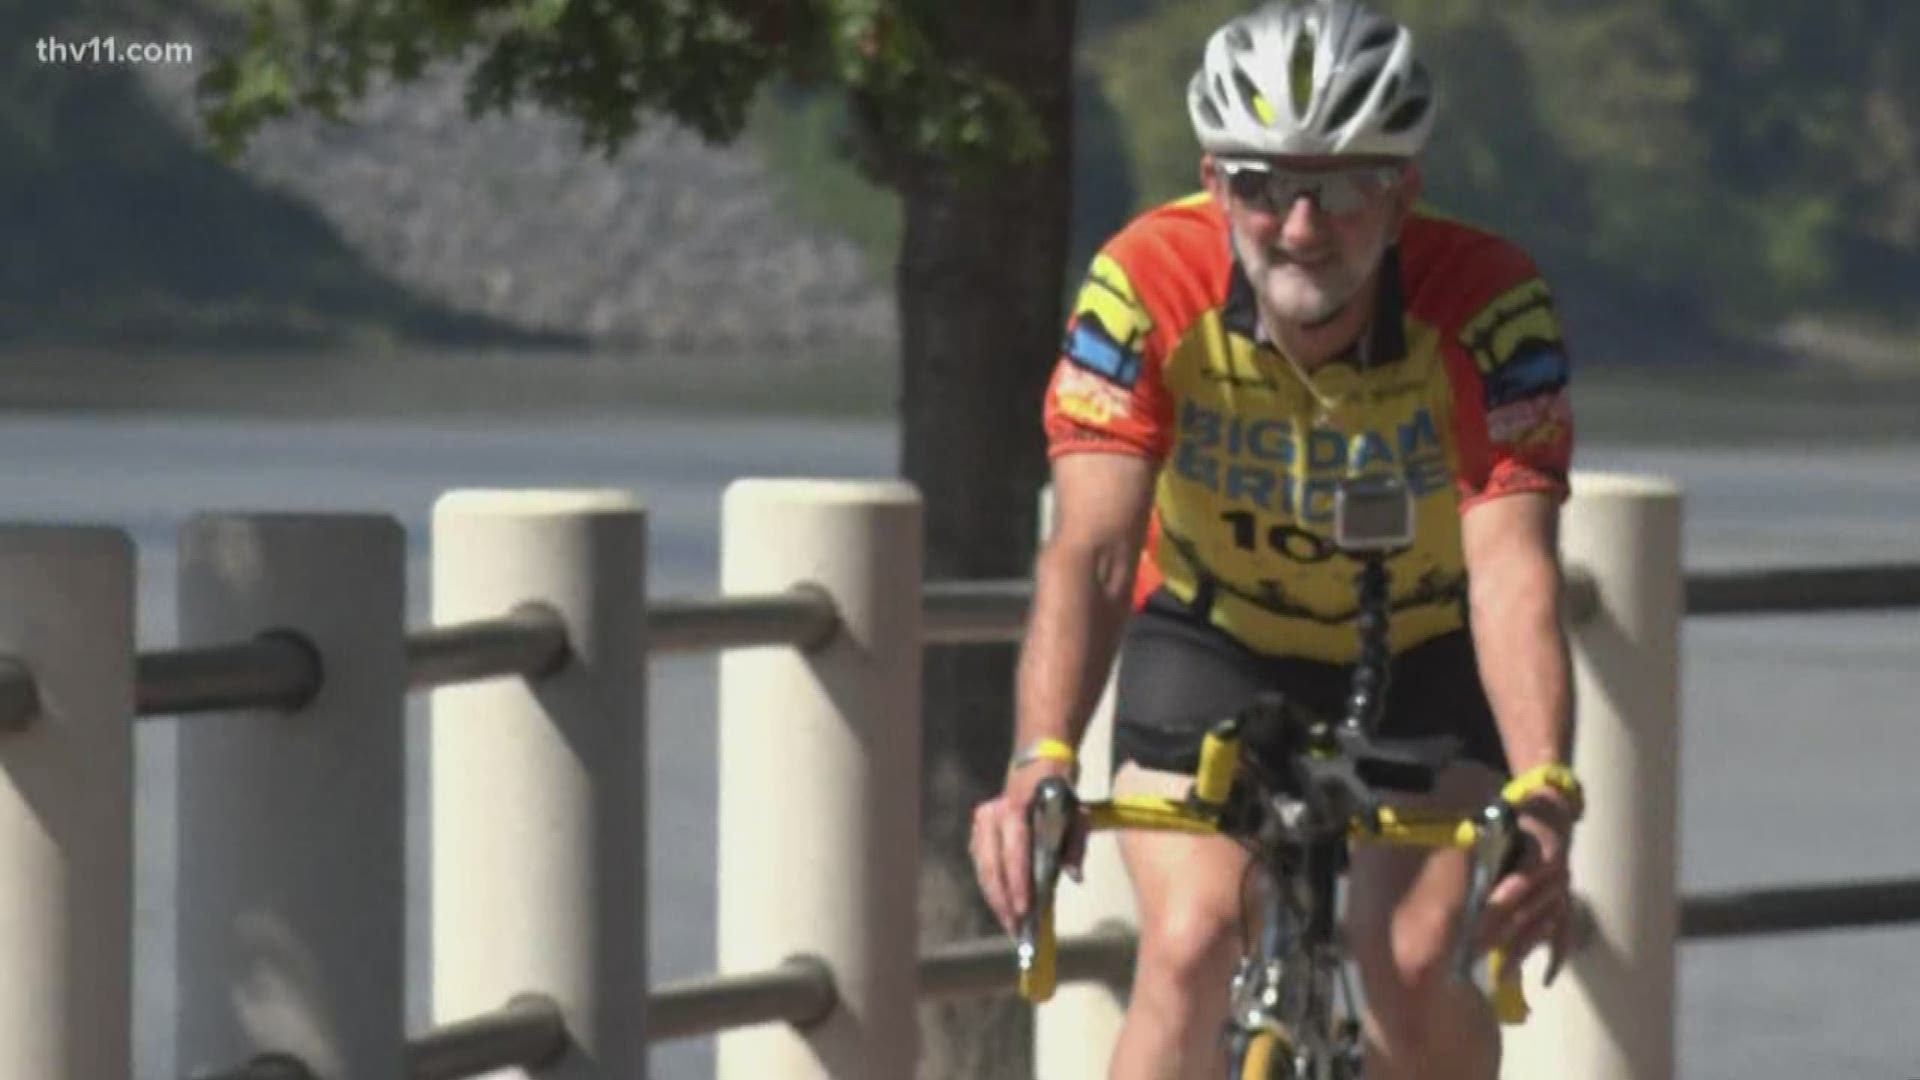 Many of us have annual traditions that we wouldn't miss for anything. For one cyclist, that's the Big Dam Bridge 100.